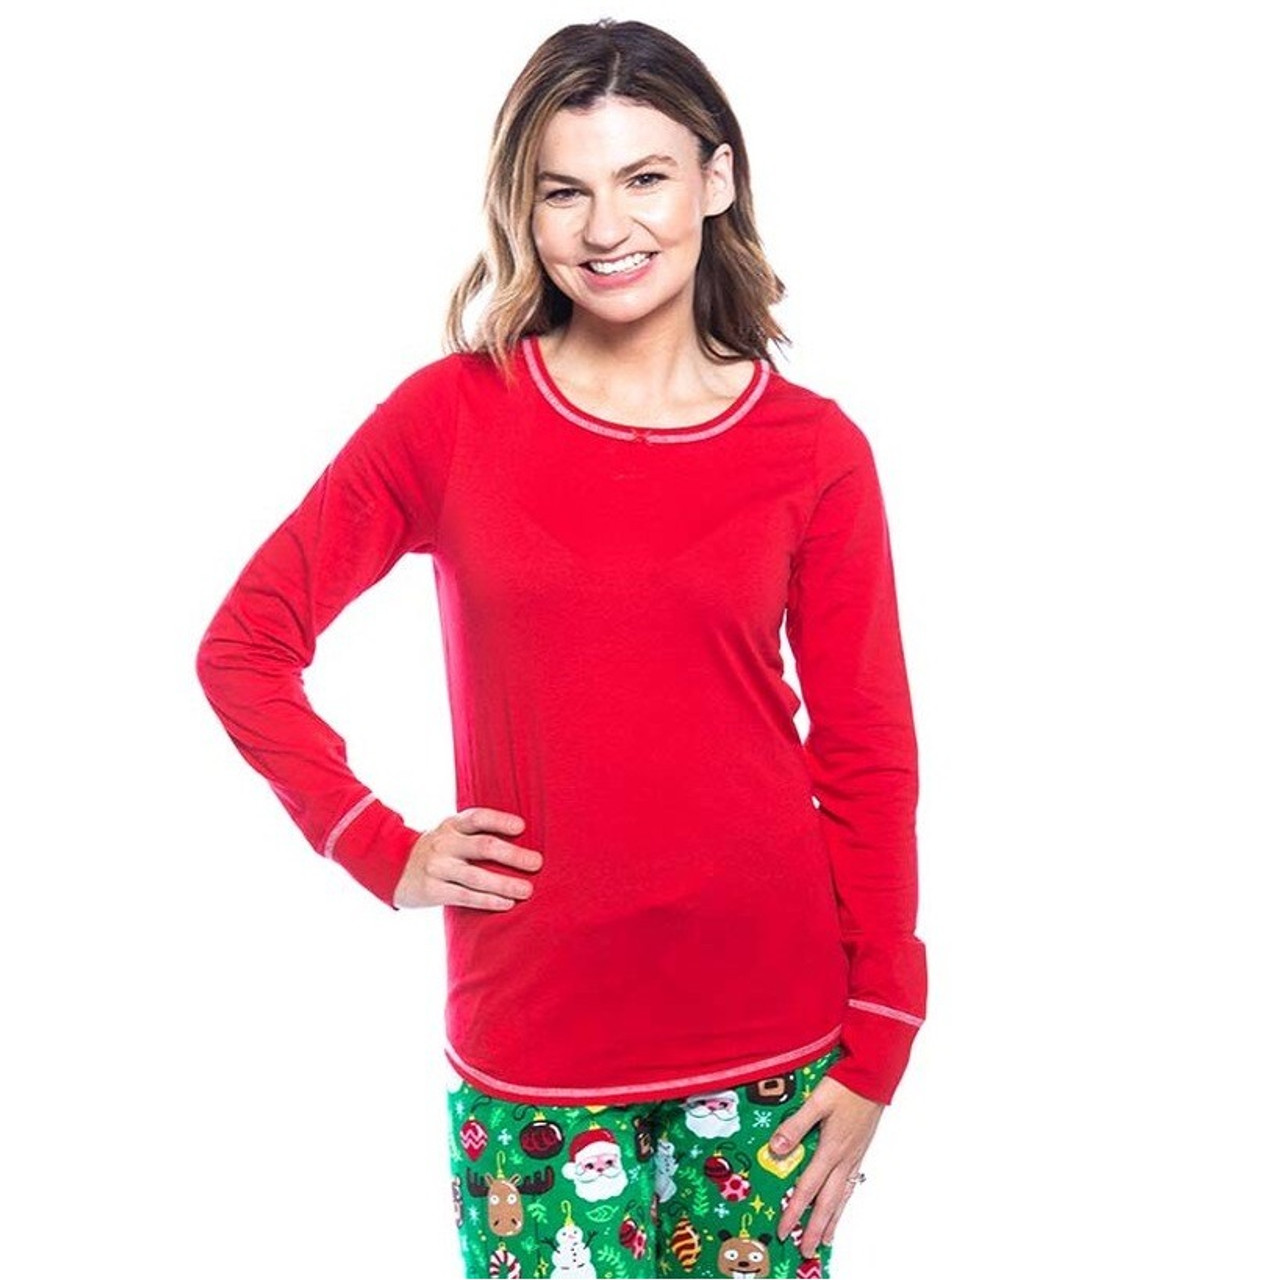 Women's Festive Red Stretch Jersey Pajama Top by Hatley